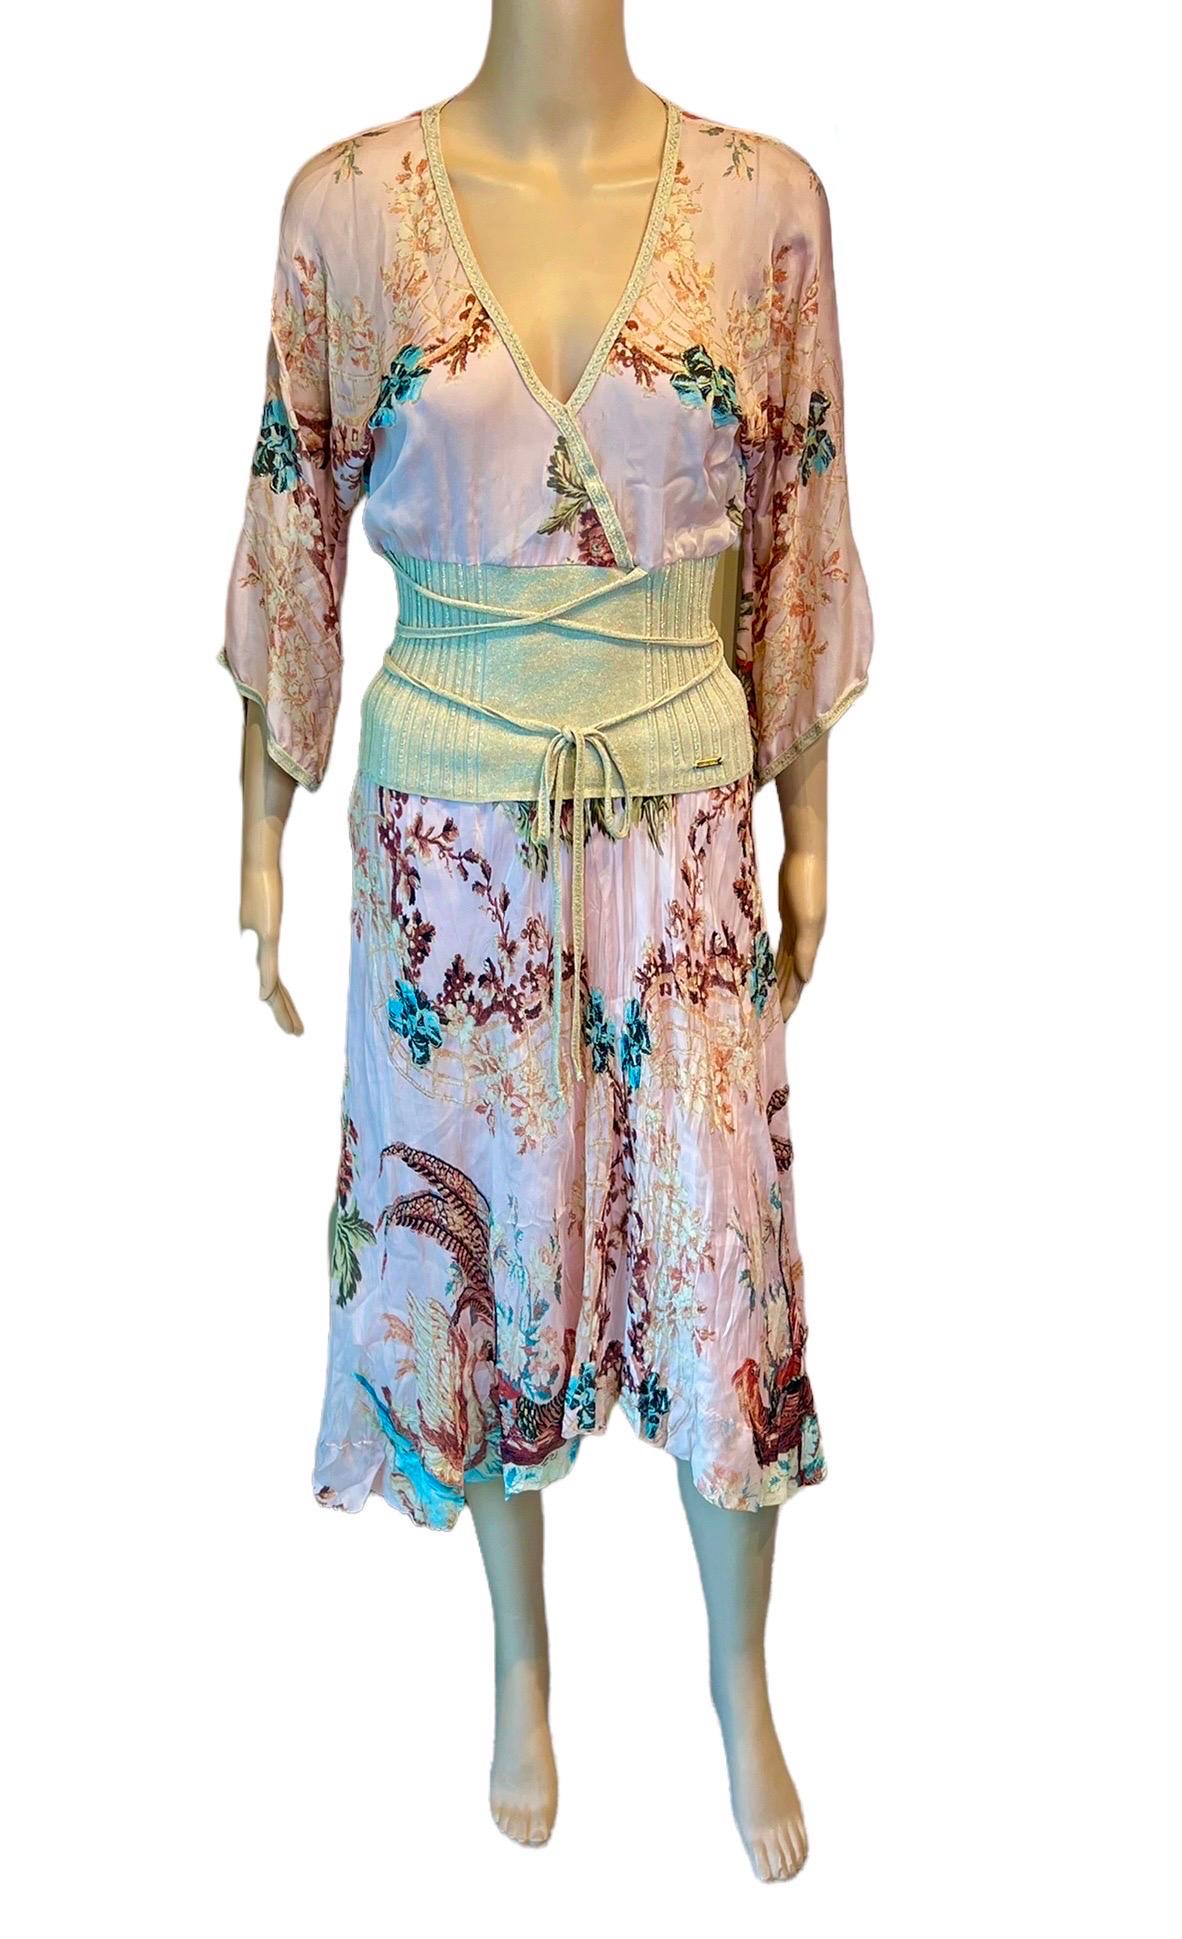 Beige Roberto Cavalli S/S 2003 Chinoiserie Print Blouse Top and Midi Skirt 2 Piece Set For Sale